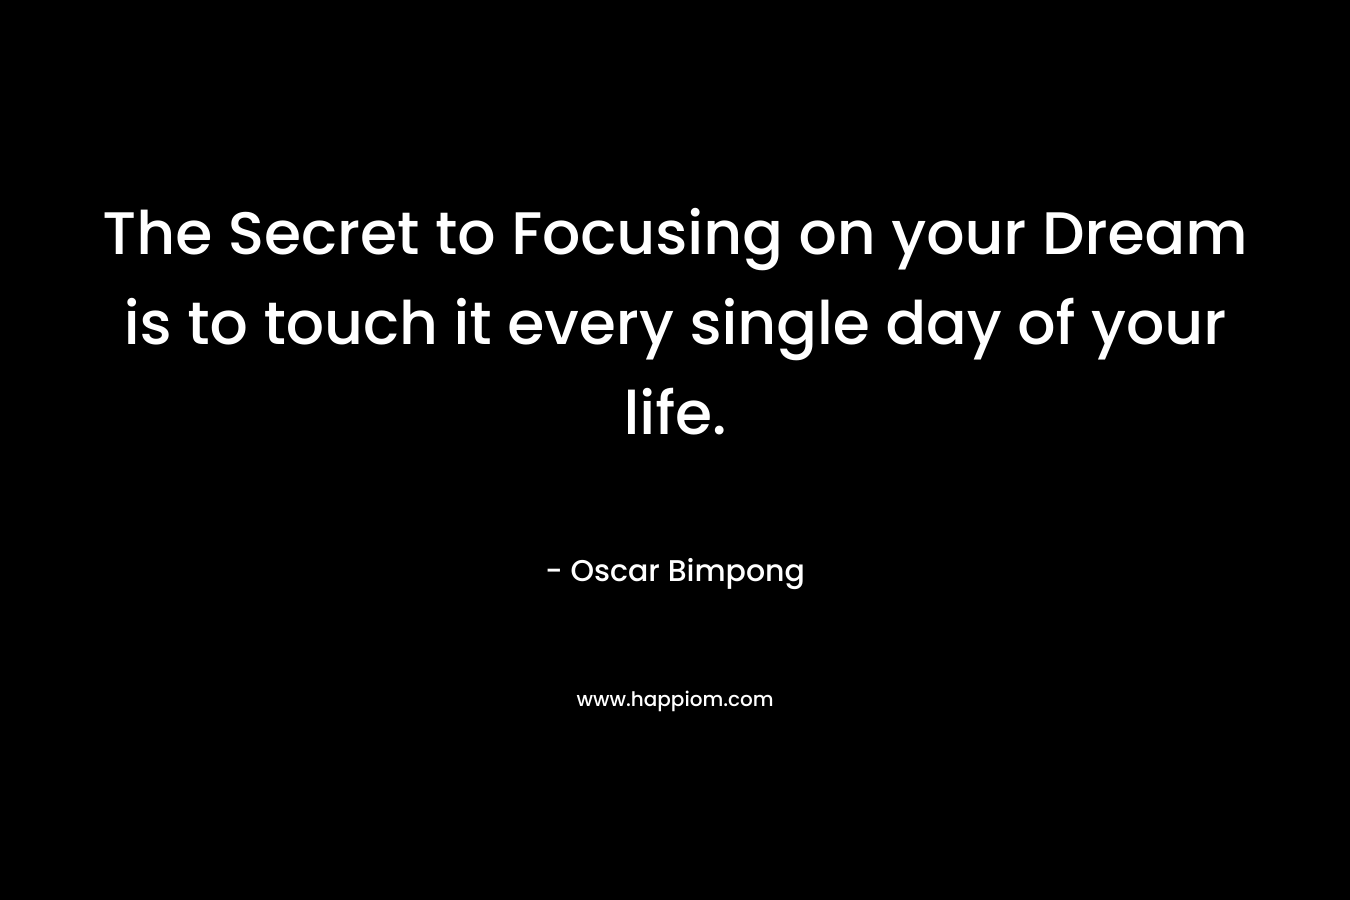 The Secret to Focusing on your Dream is to touch it every single day of your life. – Oscar Bimpong